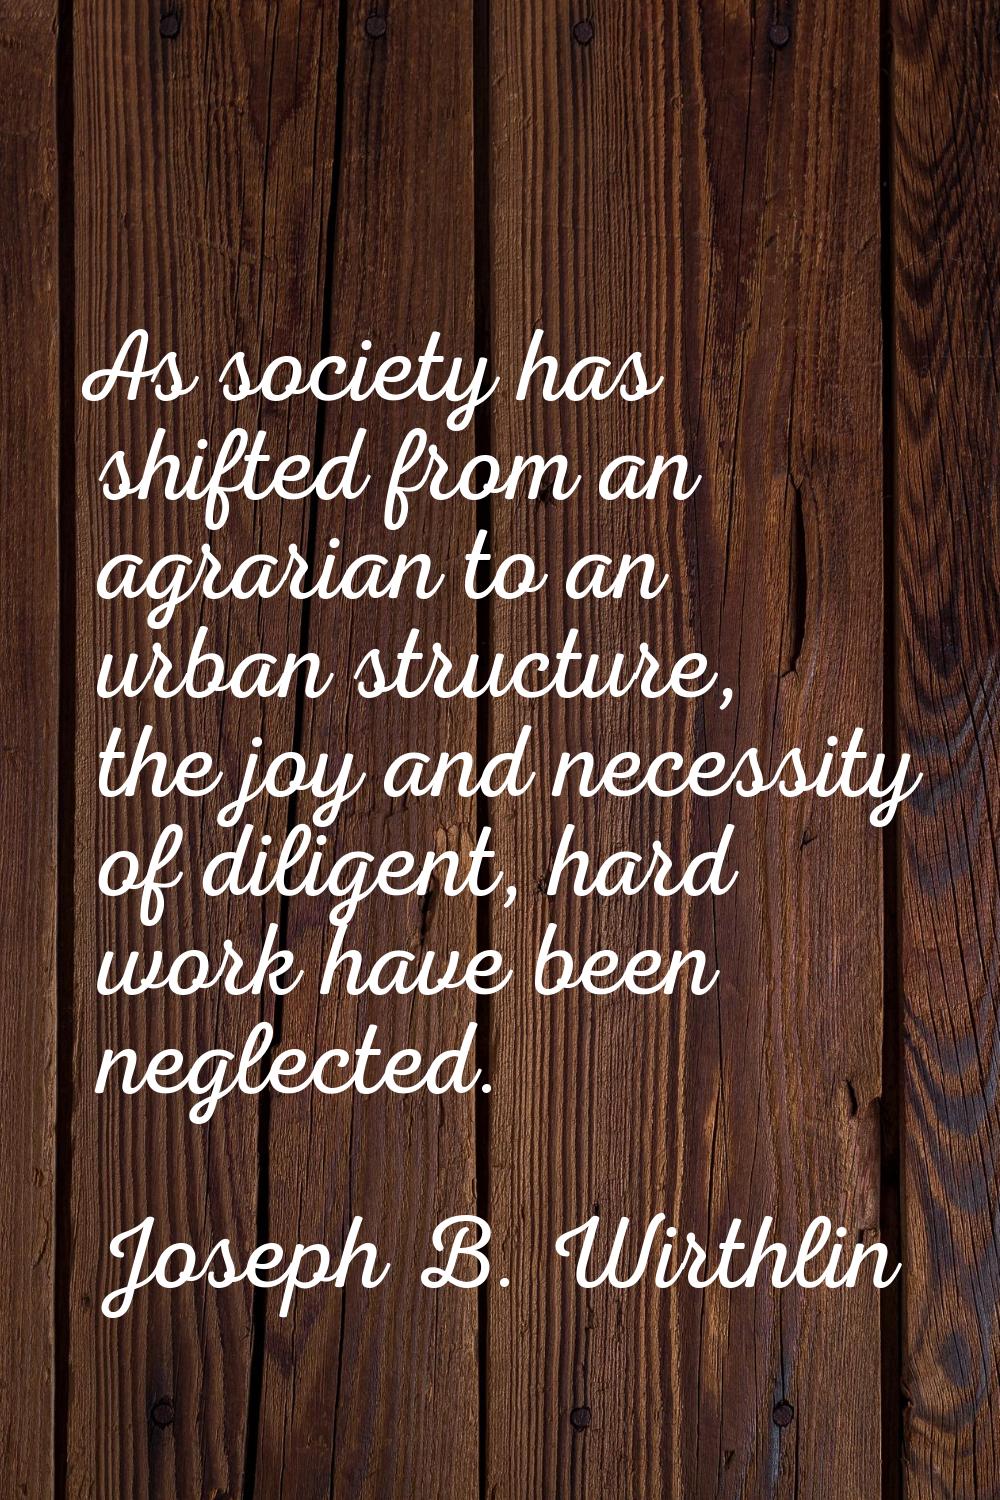 As society has shifted from an agrarian to an urban structure, the joy and necessity of diligent, h